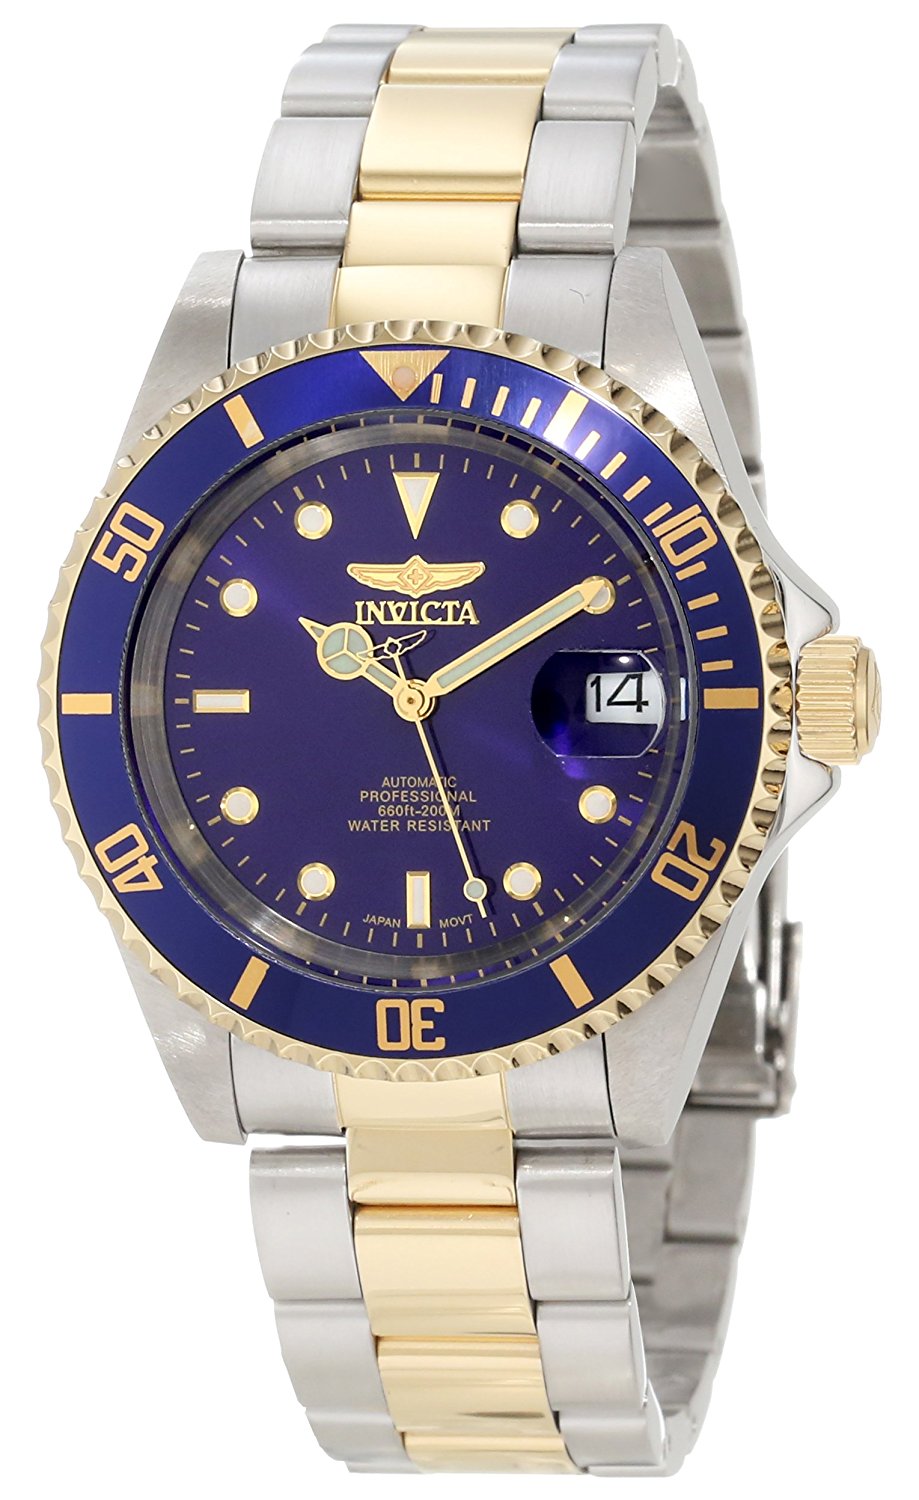 Invicta watches review